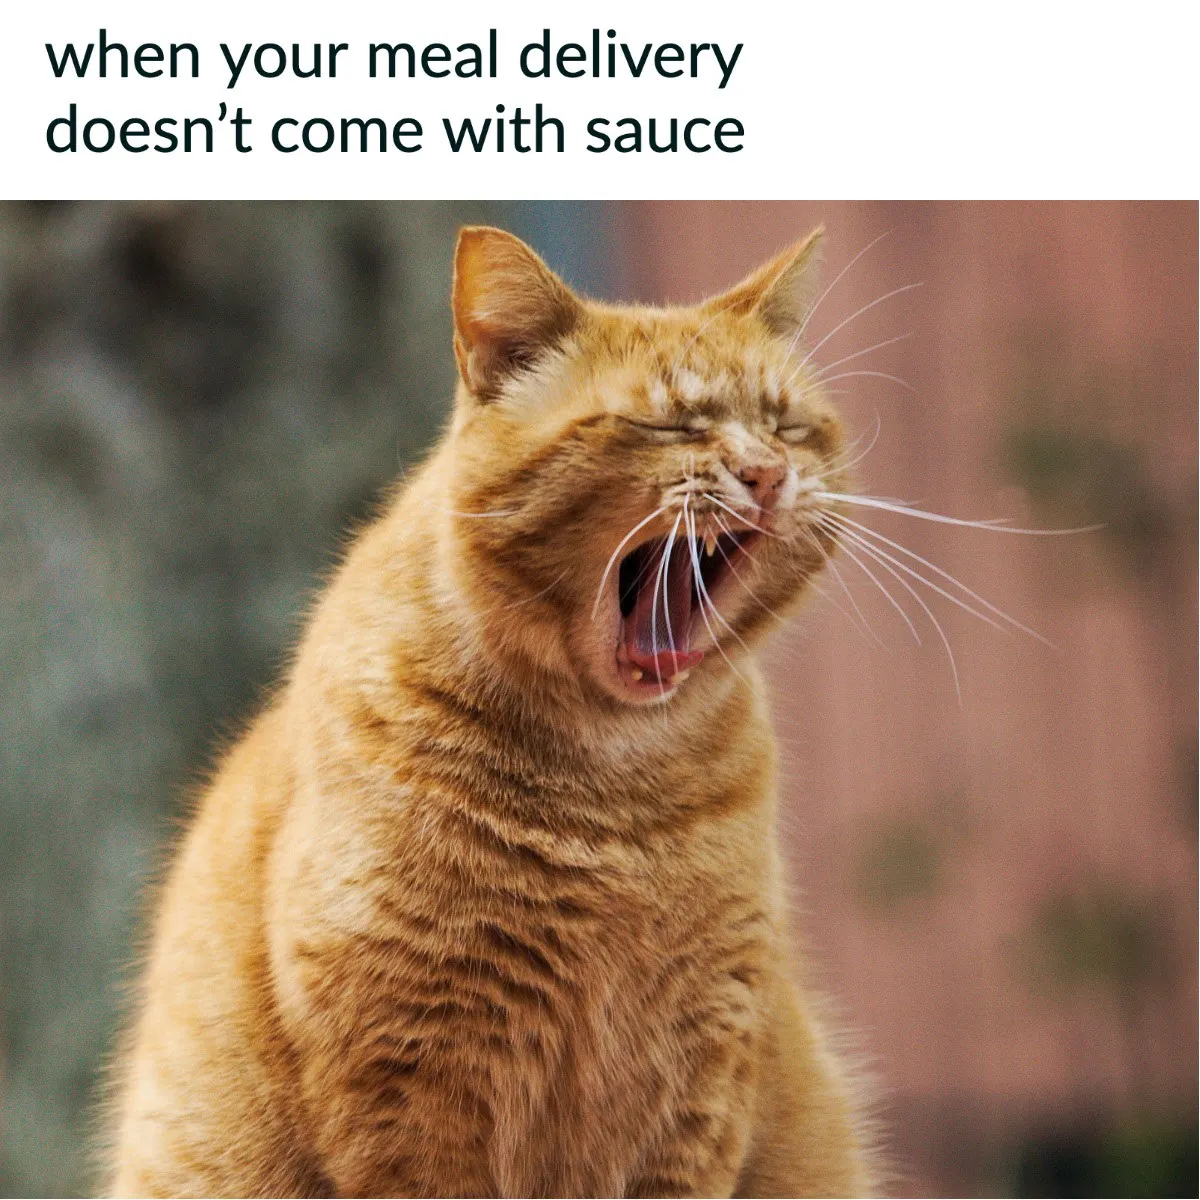 Funny Meal Delivery Angry Cat Meme